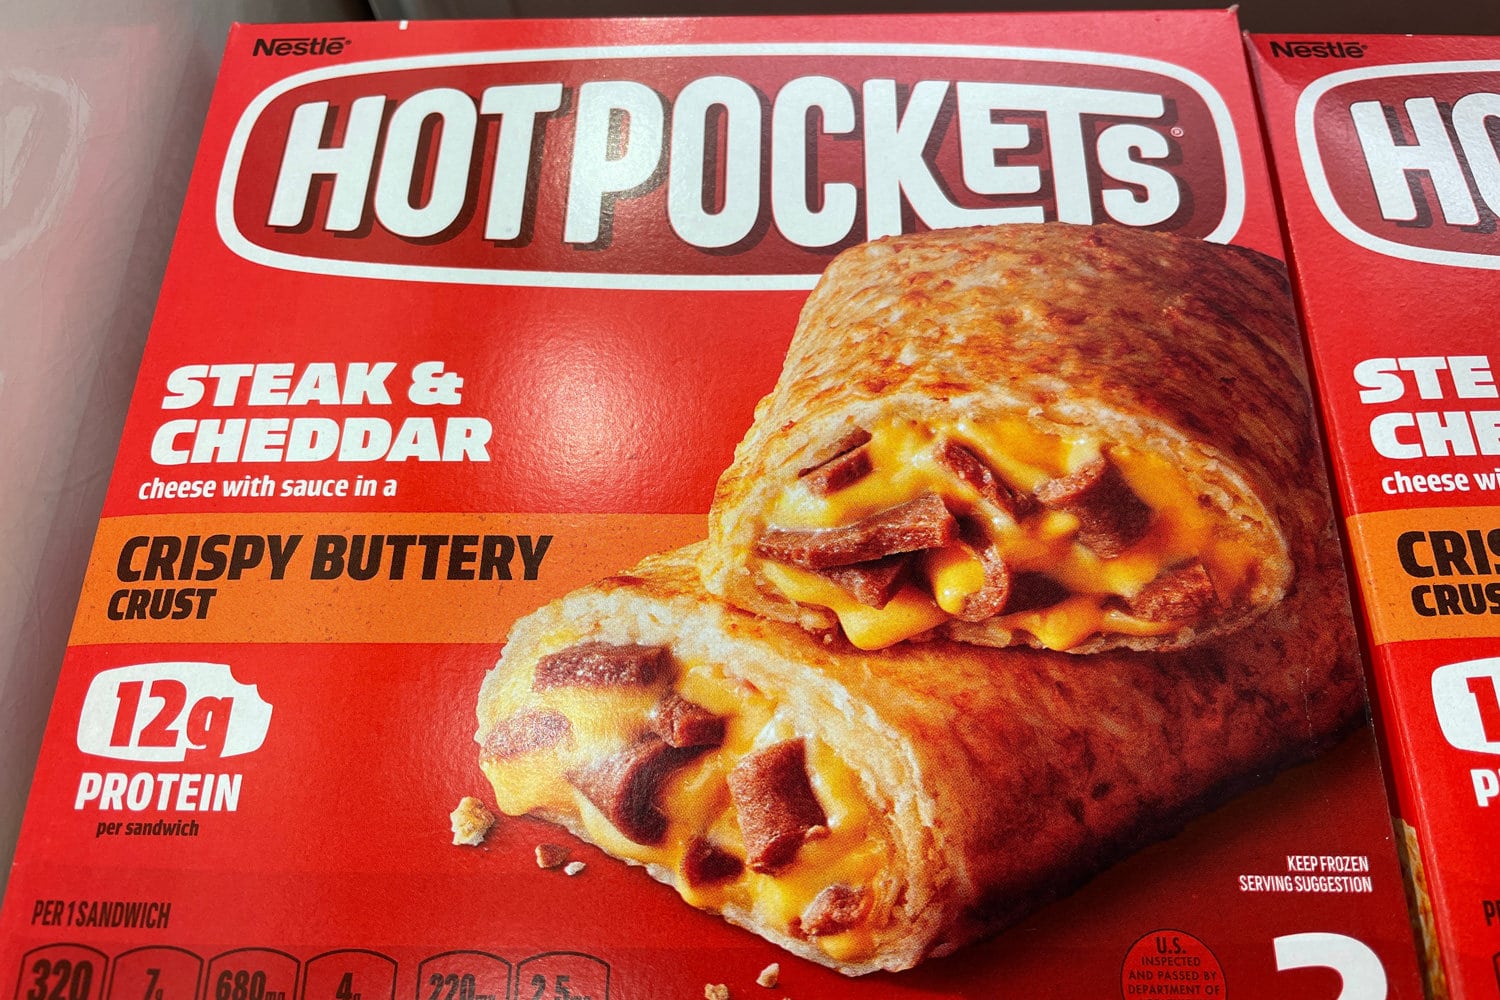 etail store display Hot Pockets looking up